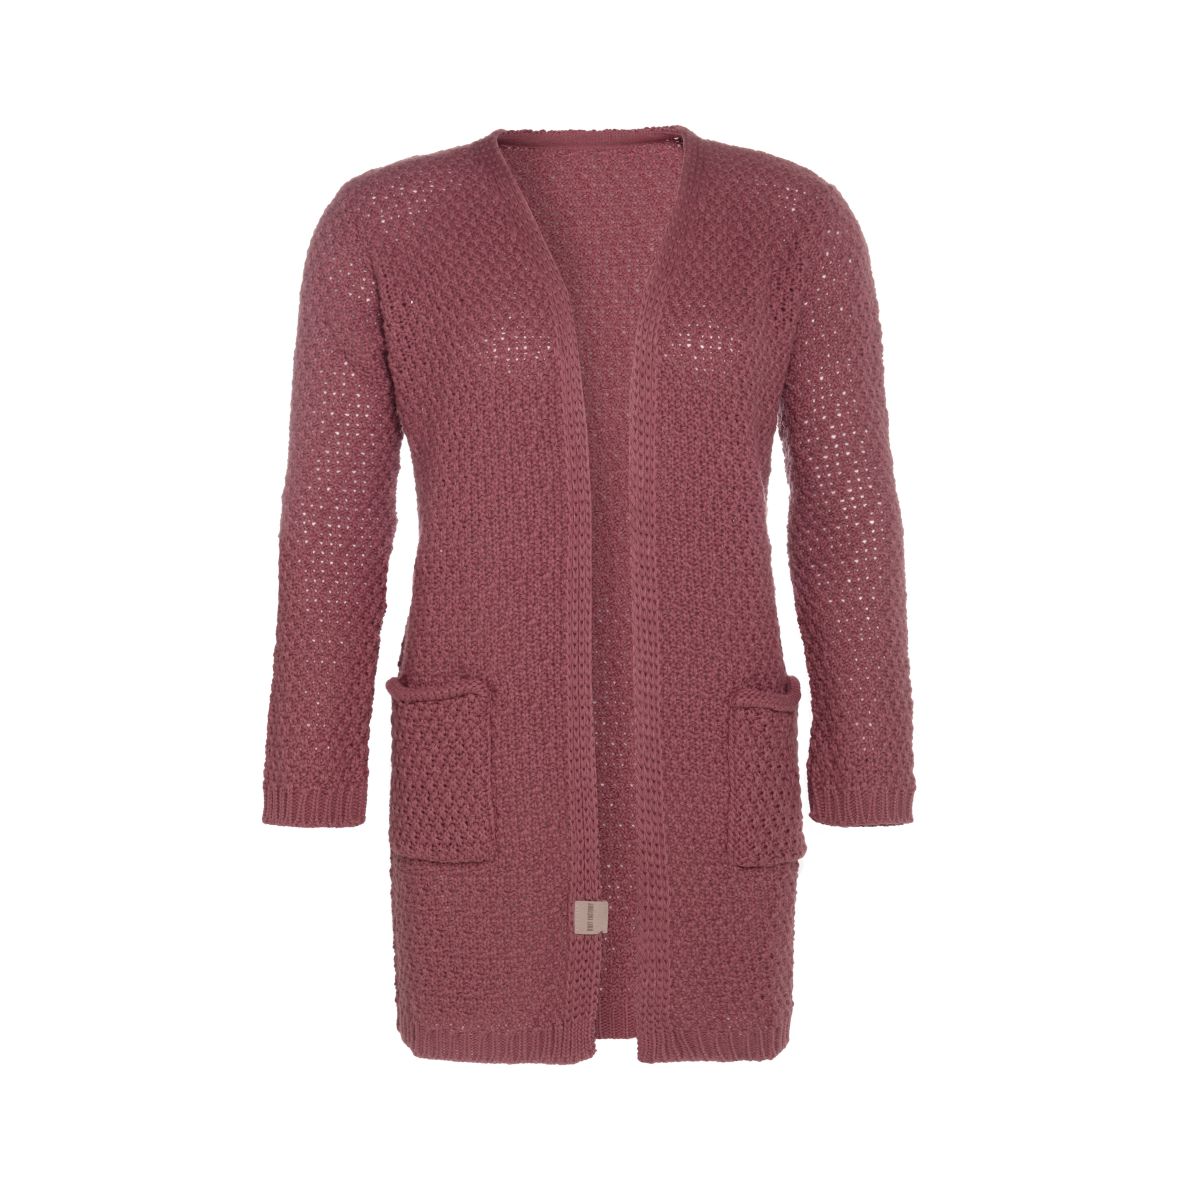 luna knitted cardigan stone red 4042 with side pockets